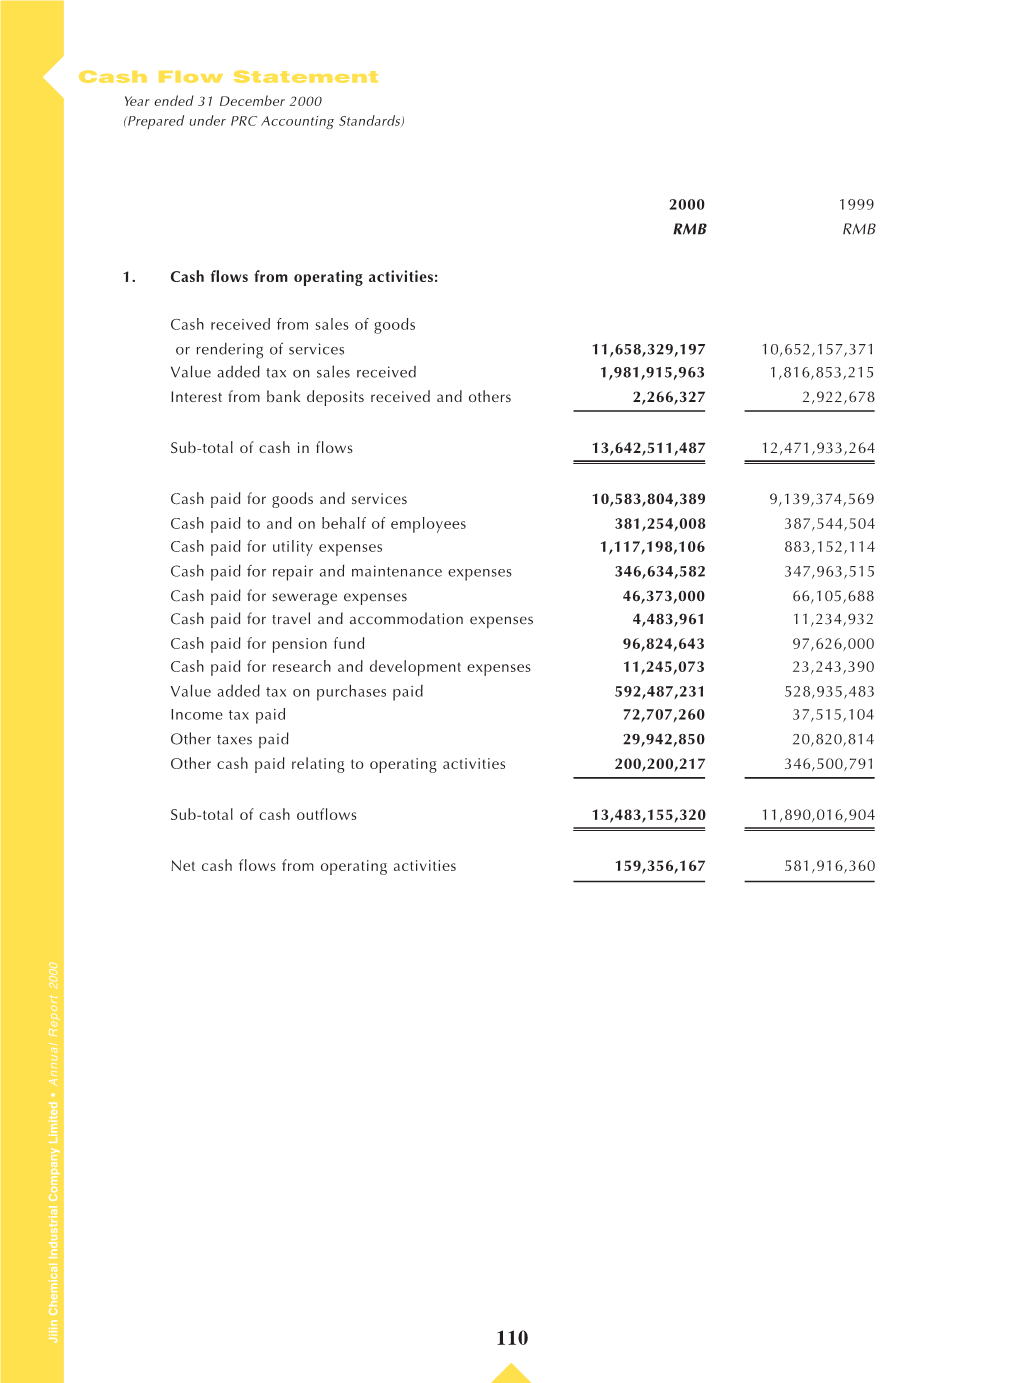 Cash Flow Statement Year Ended 31 December 2000 (Prepared Under PRC Accounting Standards)